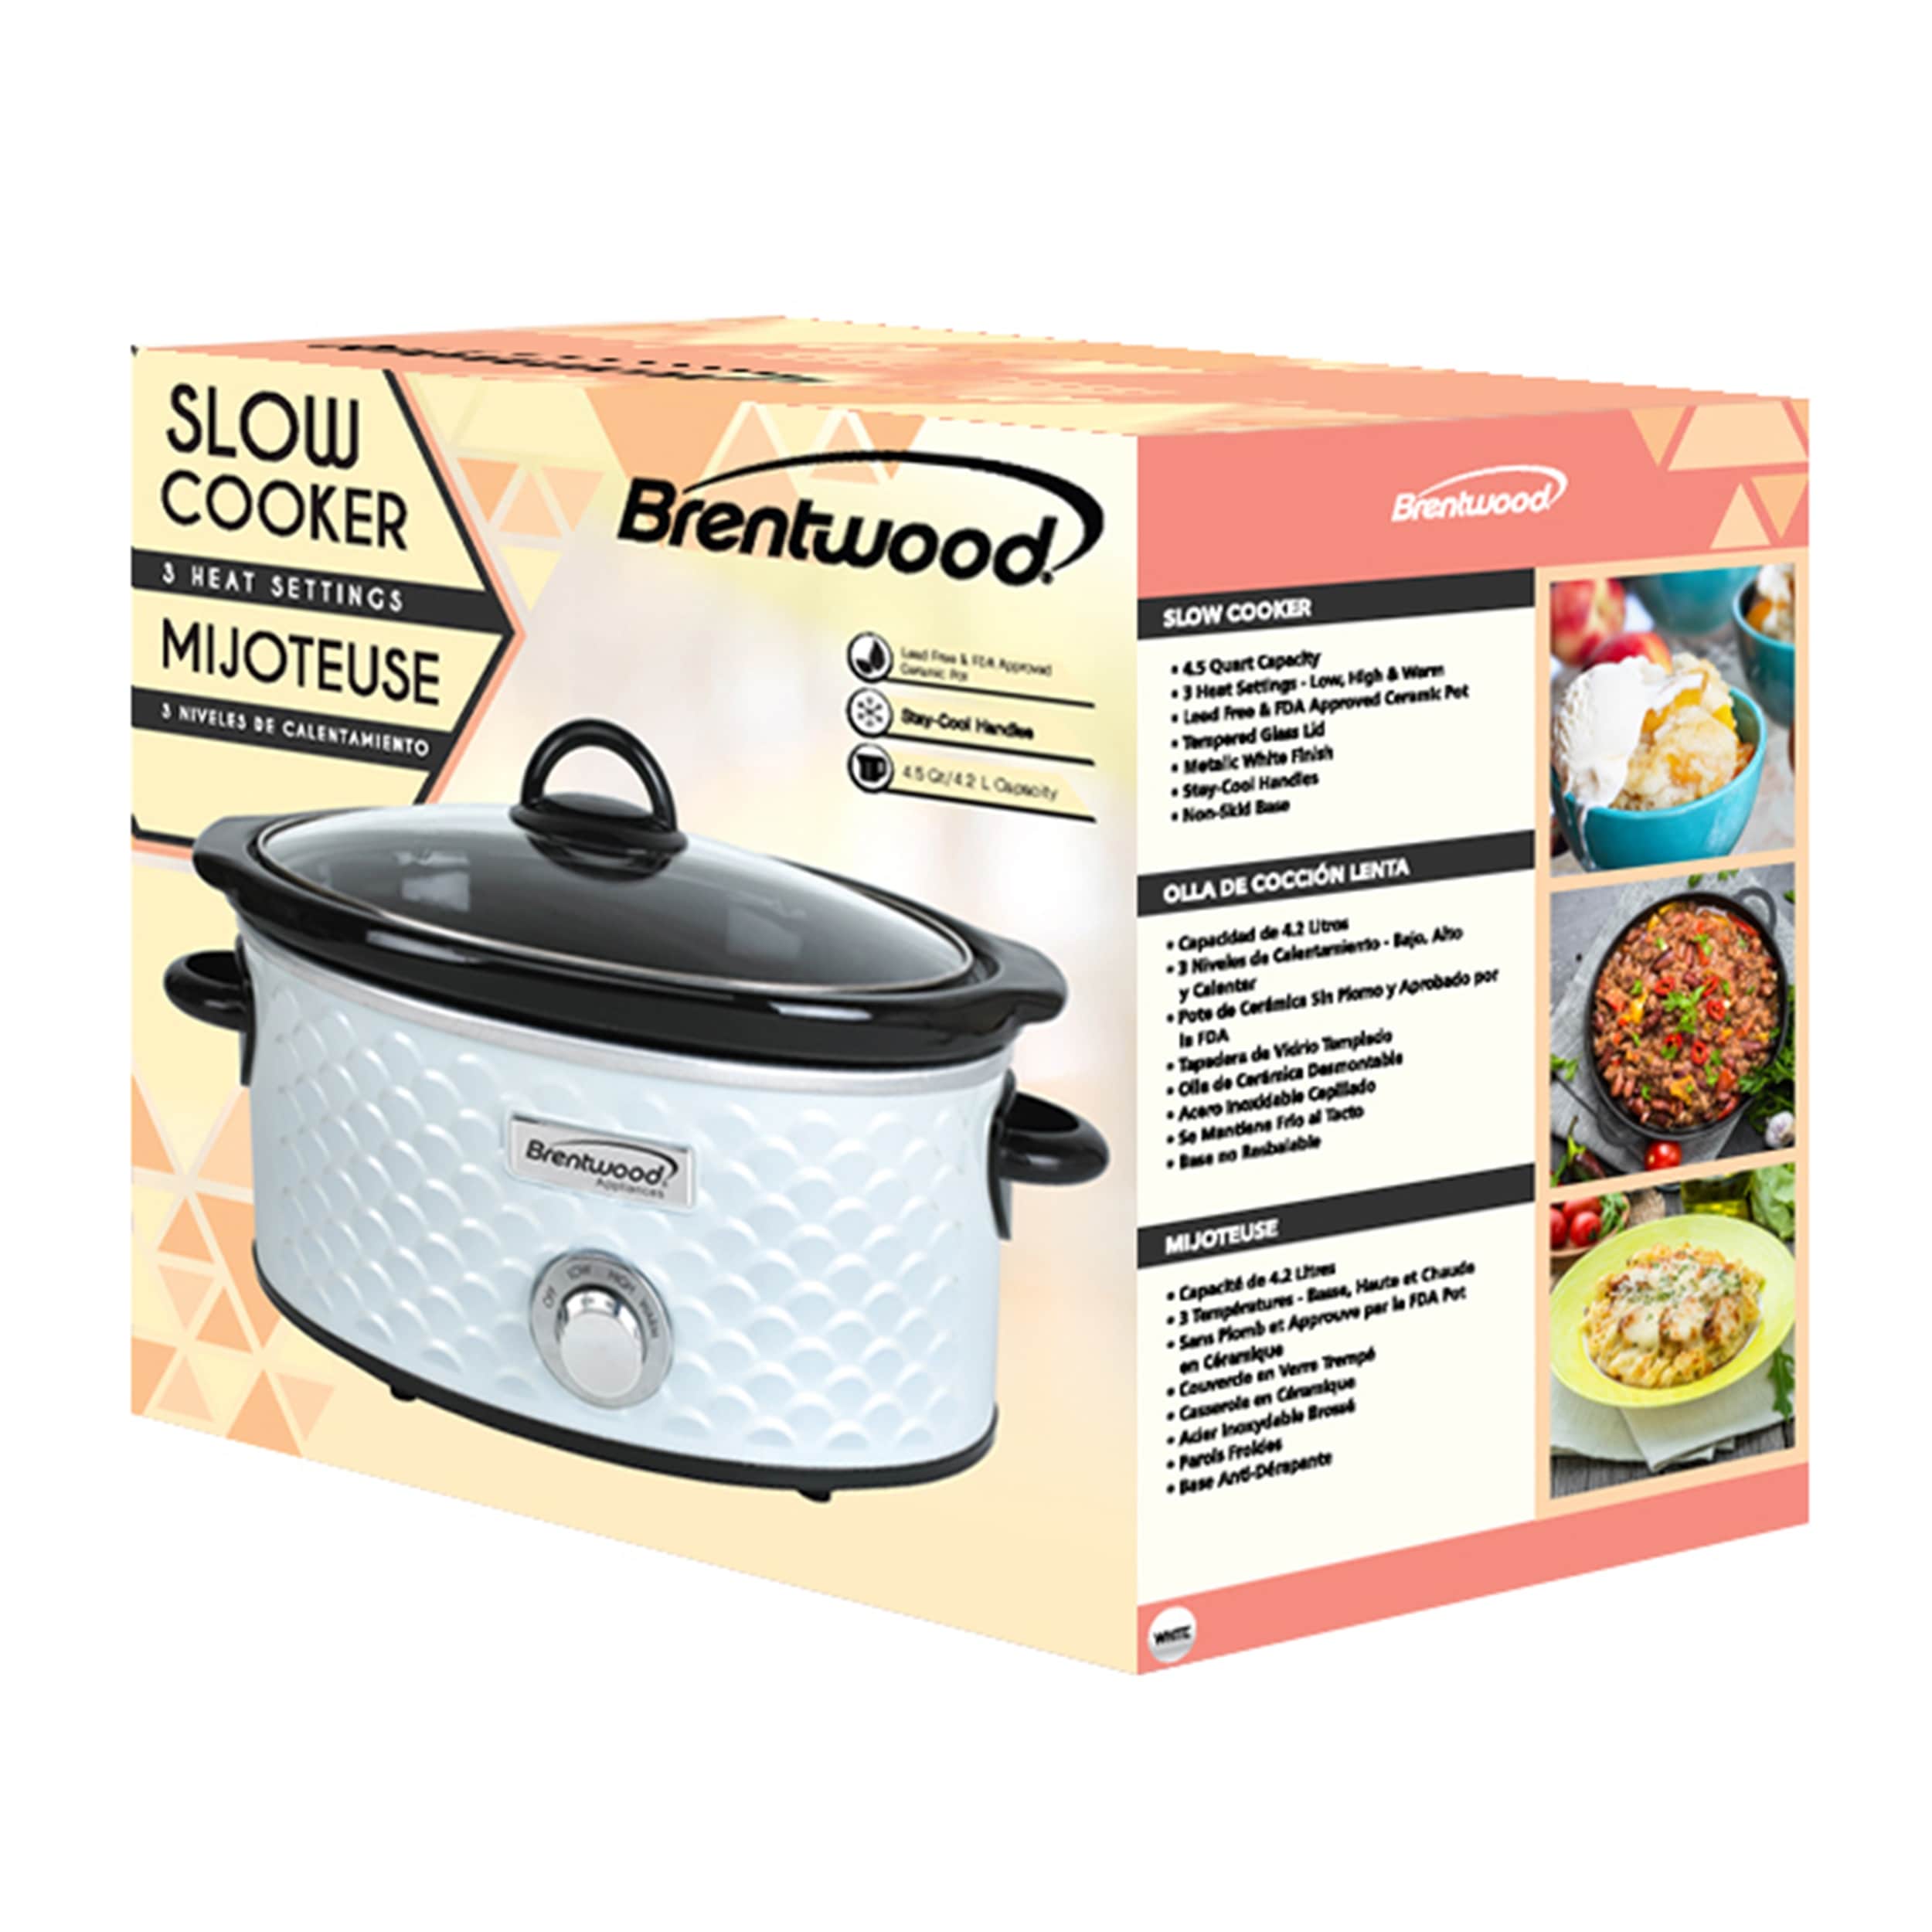 Brentwood Scallop Pattern 4.5 Quart Slow Cooker in Stainless Steel